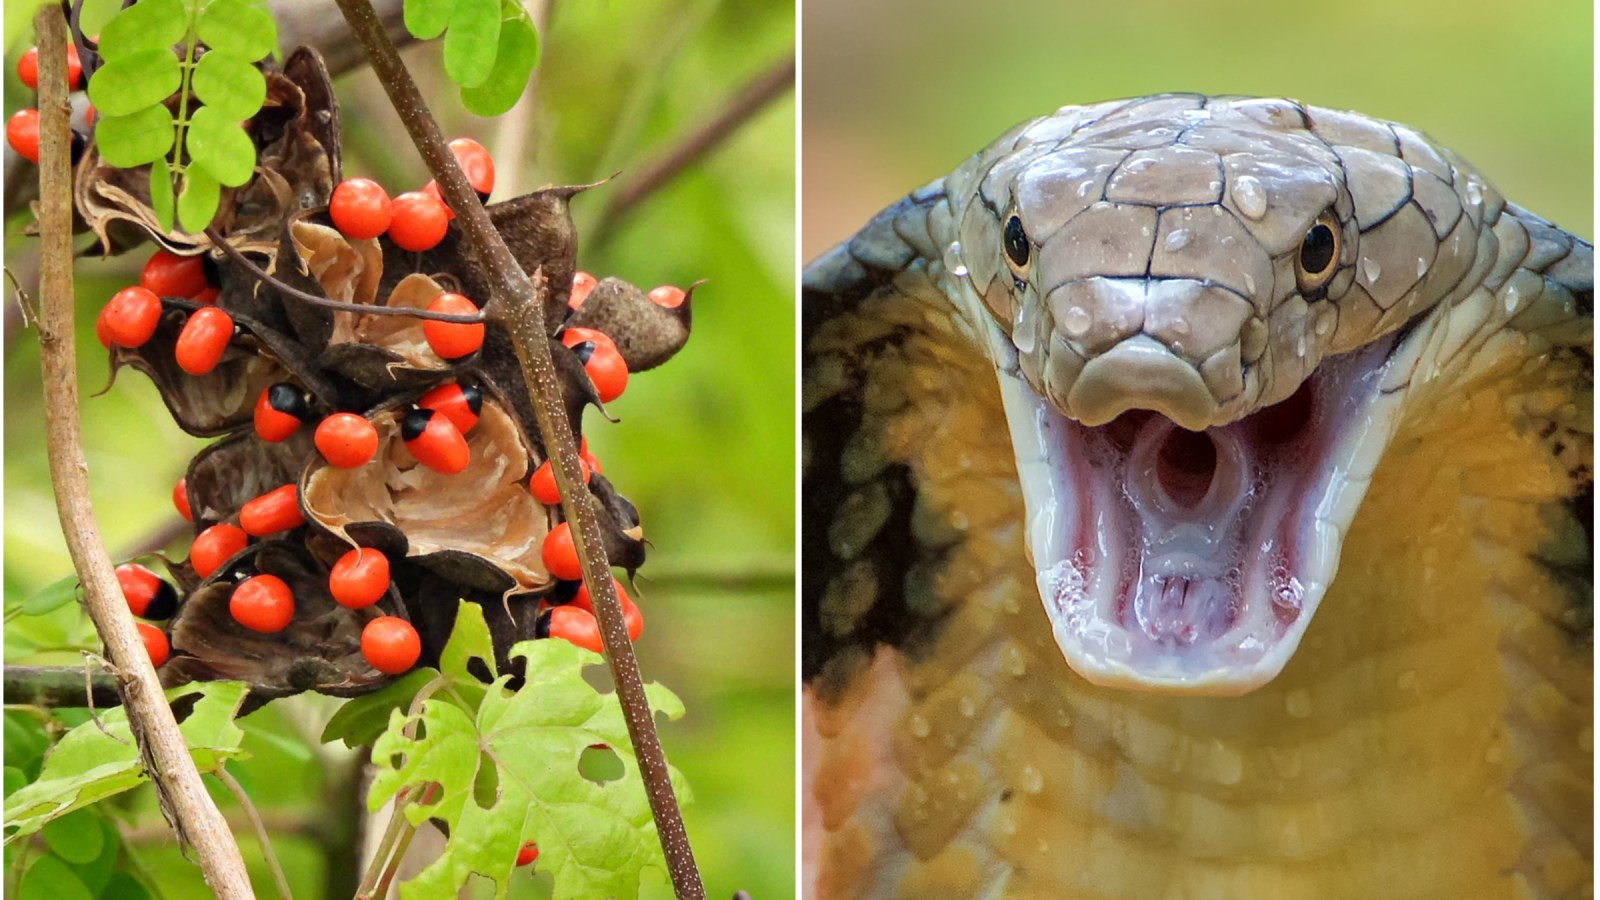 What Common Plant is More Deadly Than a King Cobra?